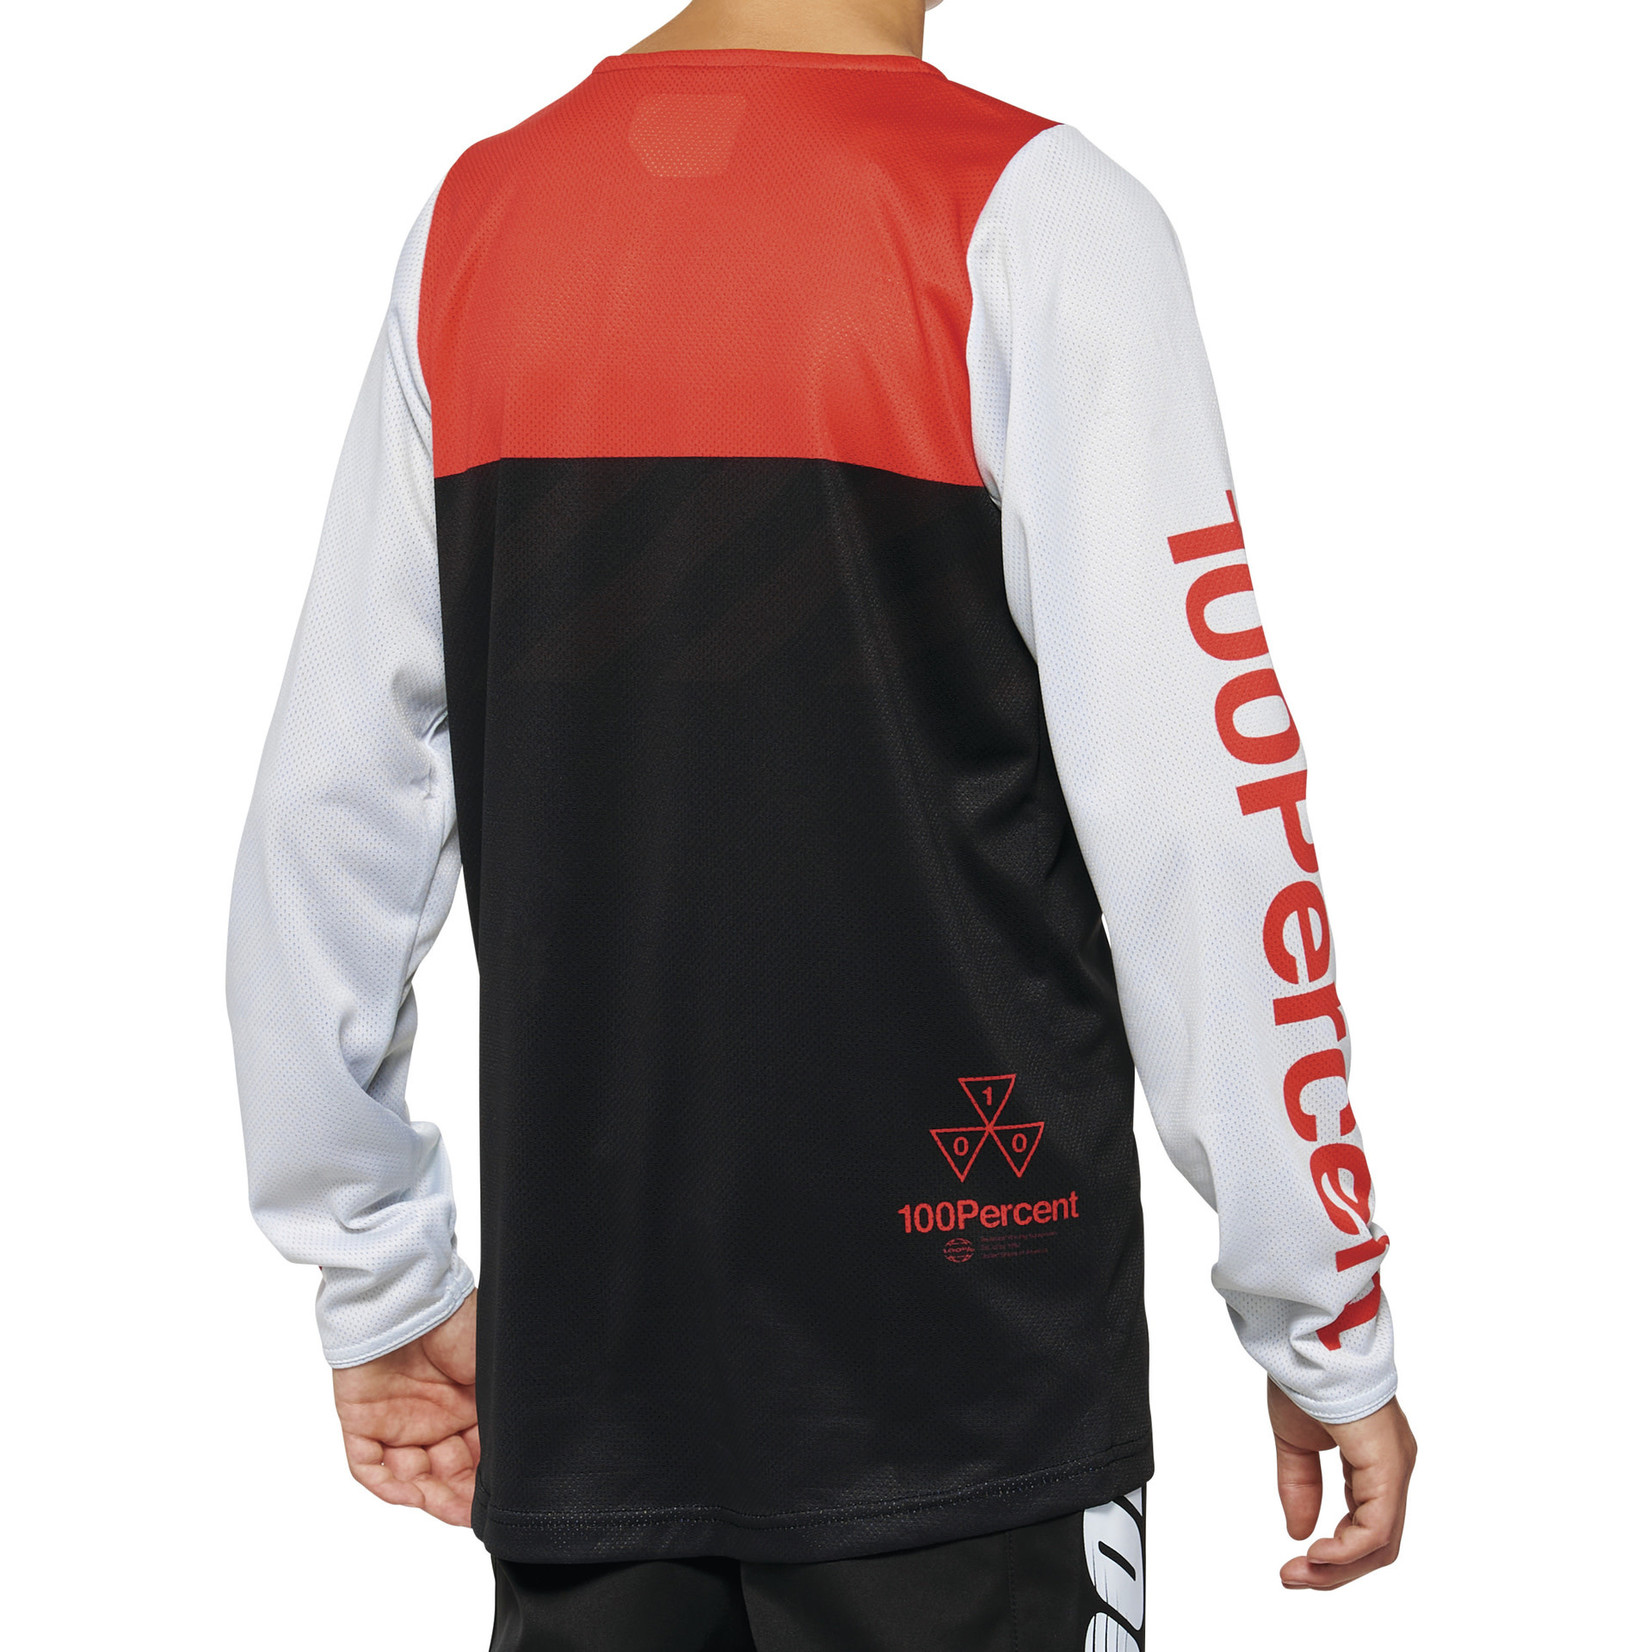 100 Percent 100% R-Core Youth Bike Jersey - Black/Racer Red 100% Polyester